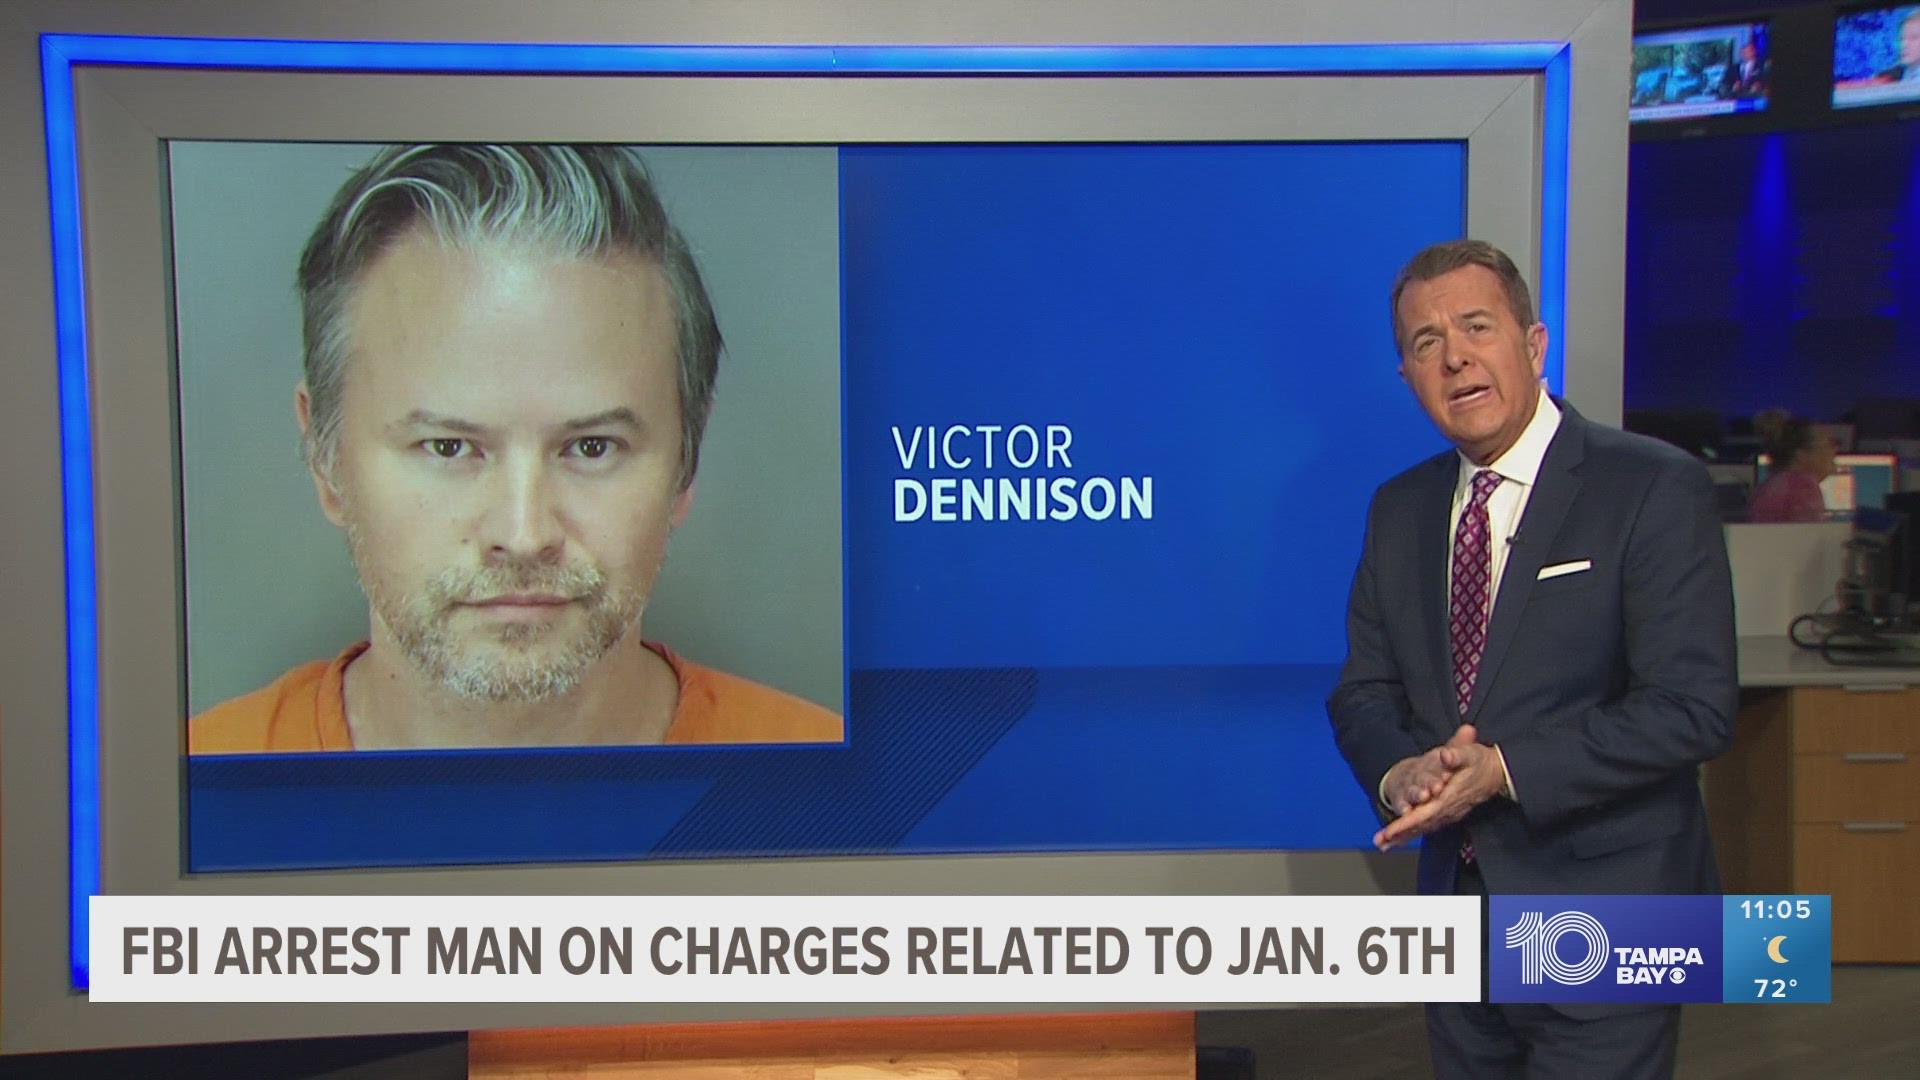 Victor Sean Dennison recorded a video of himself describing his actions on Jan. 6, the FBI alleges. He then skipped trial.